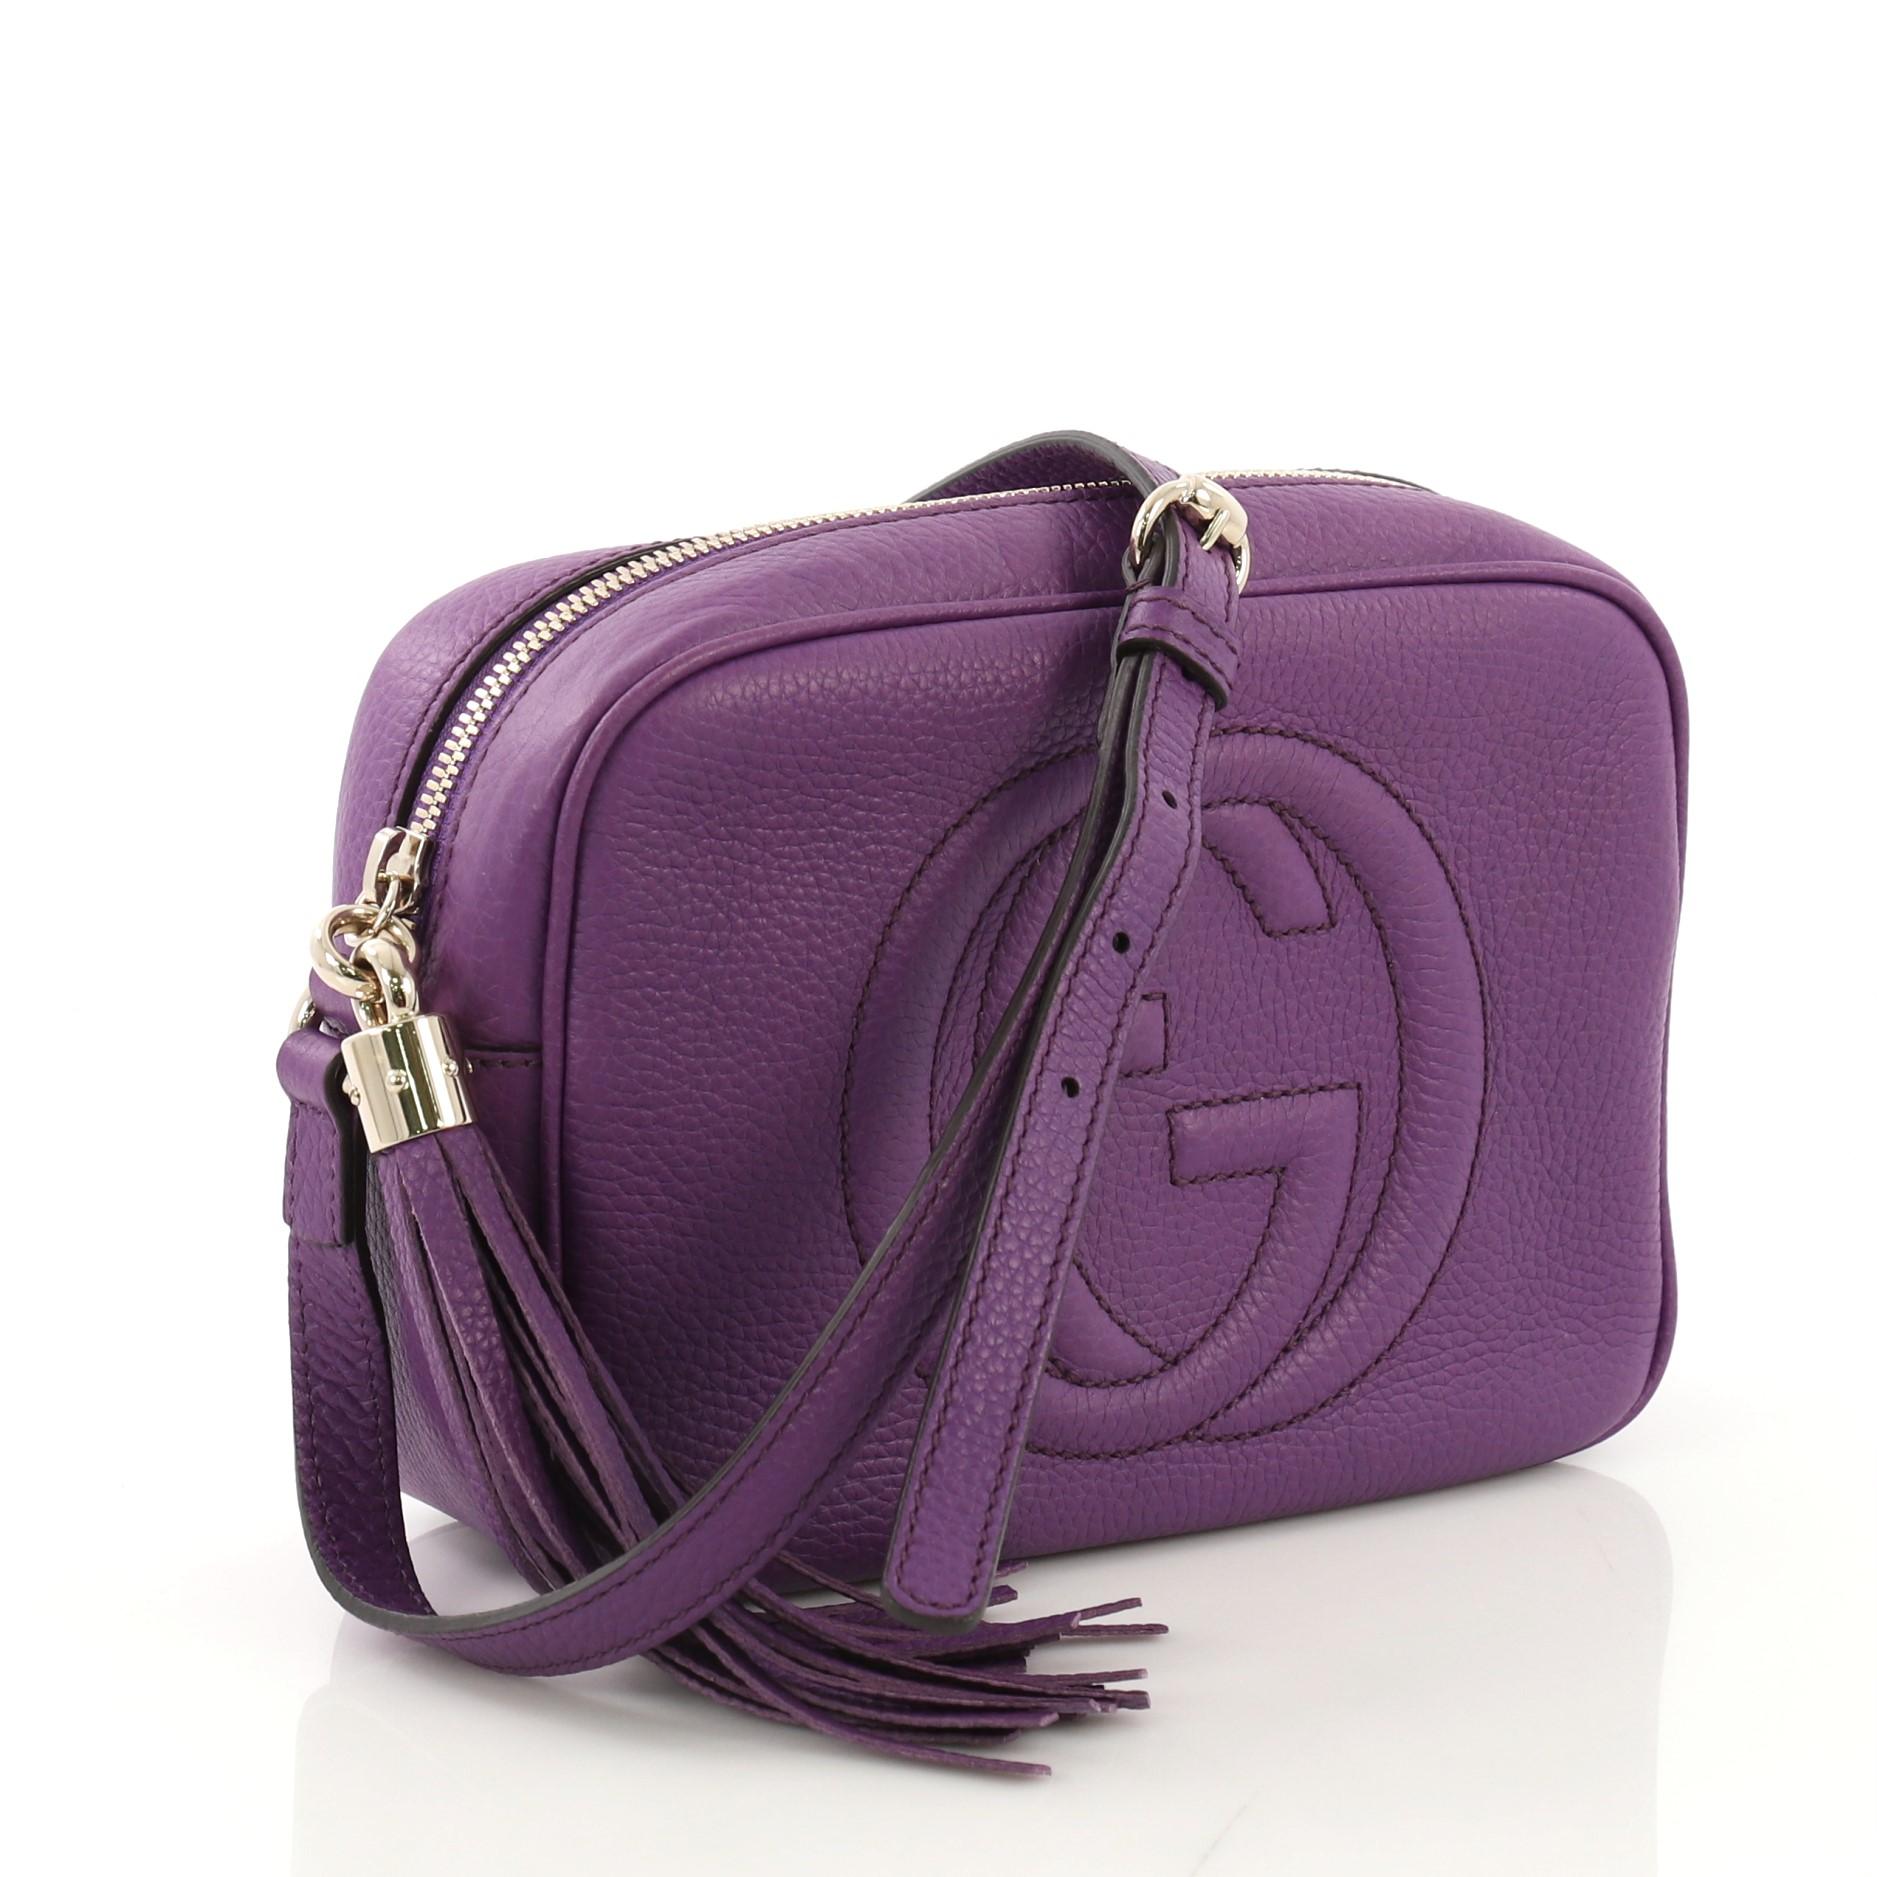 This Gucci Soho Disco Crossbody Bag Leather Small, crafted in purple leather, features an adjustable leather strap, tassel zip pull, and gold-tone hardware. Its zip closure opens to a beige fabric interior with slip pockets. 

Estimated Retail